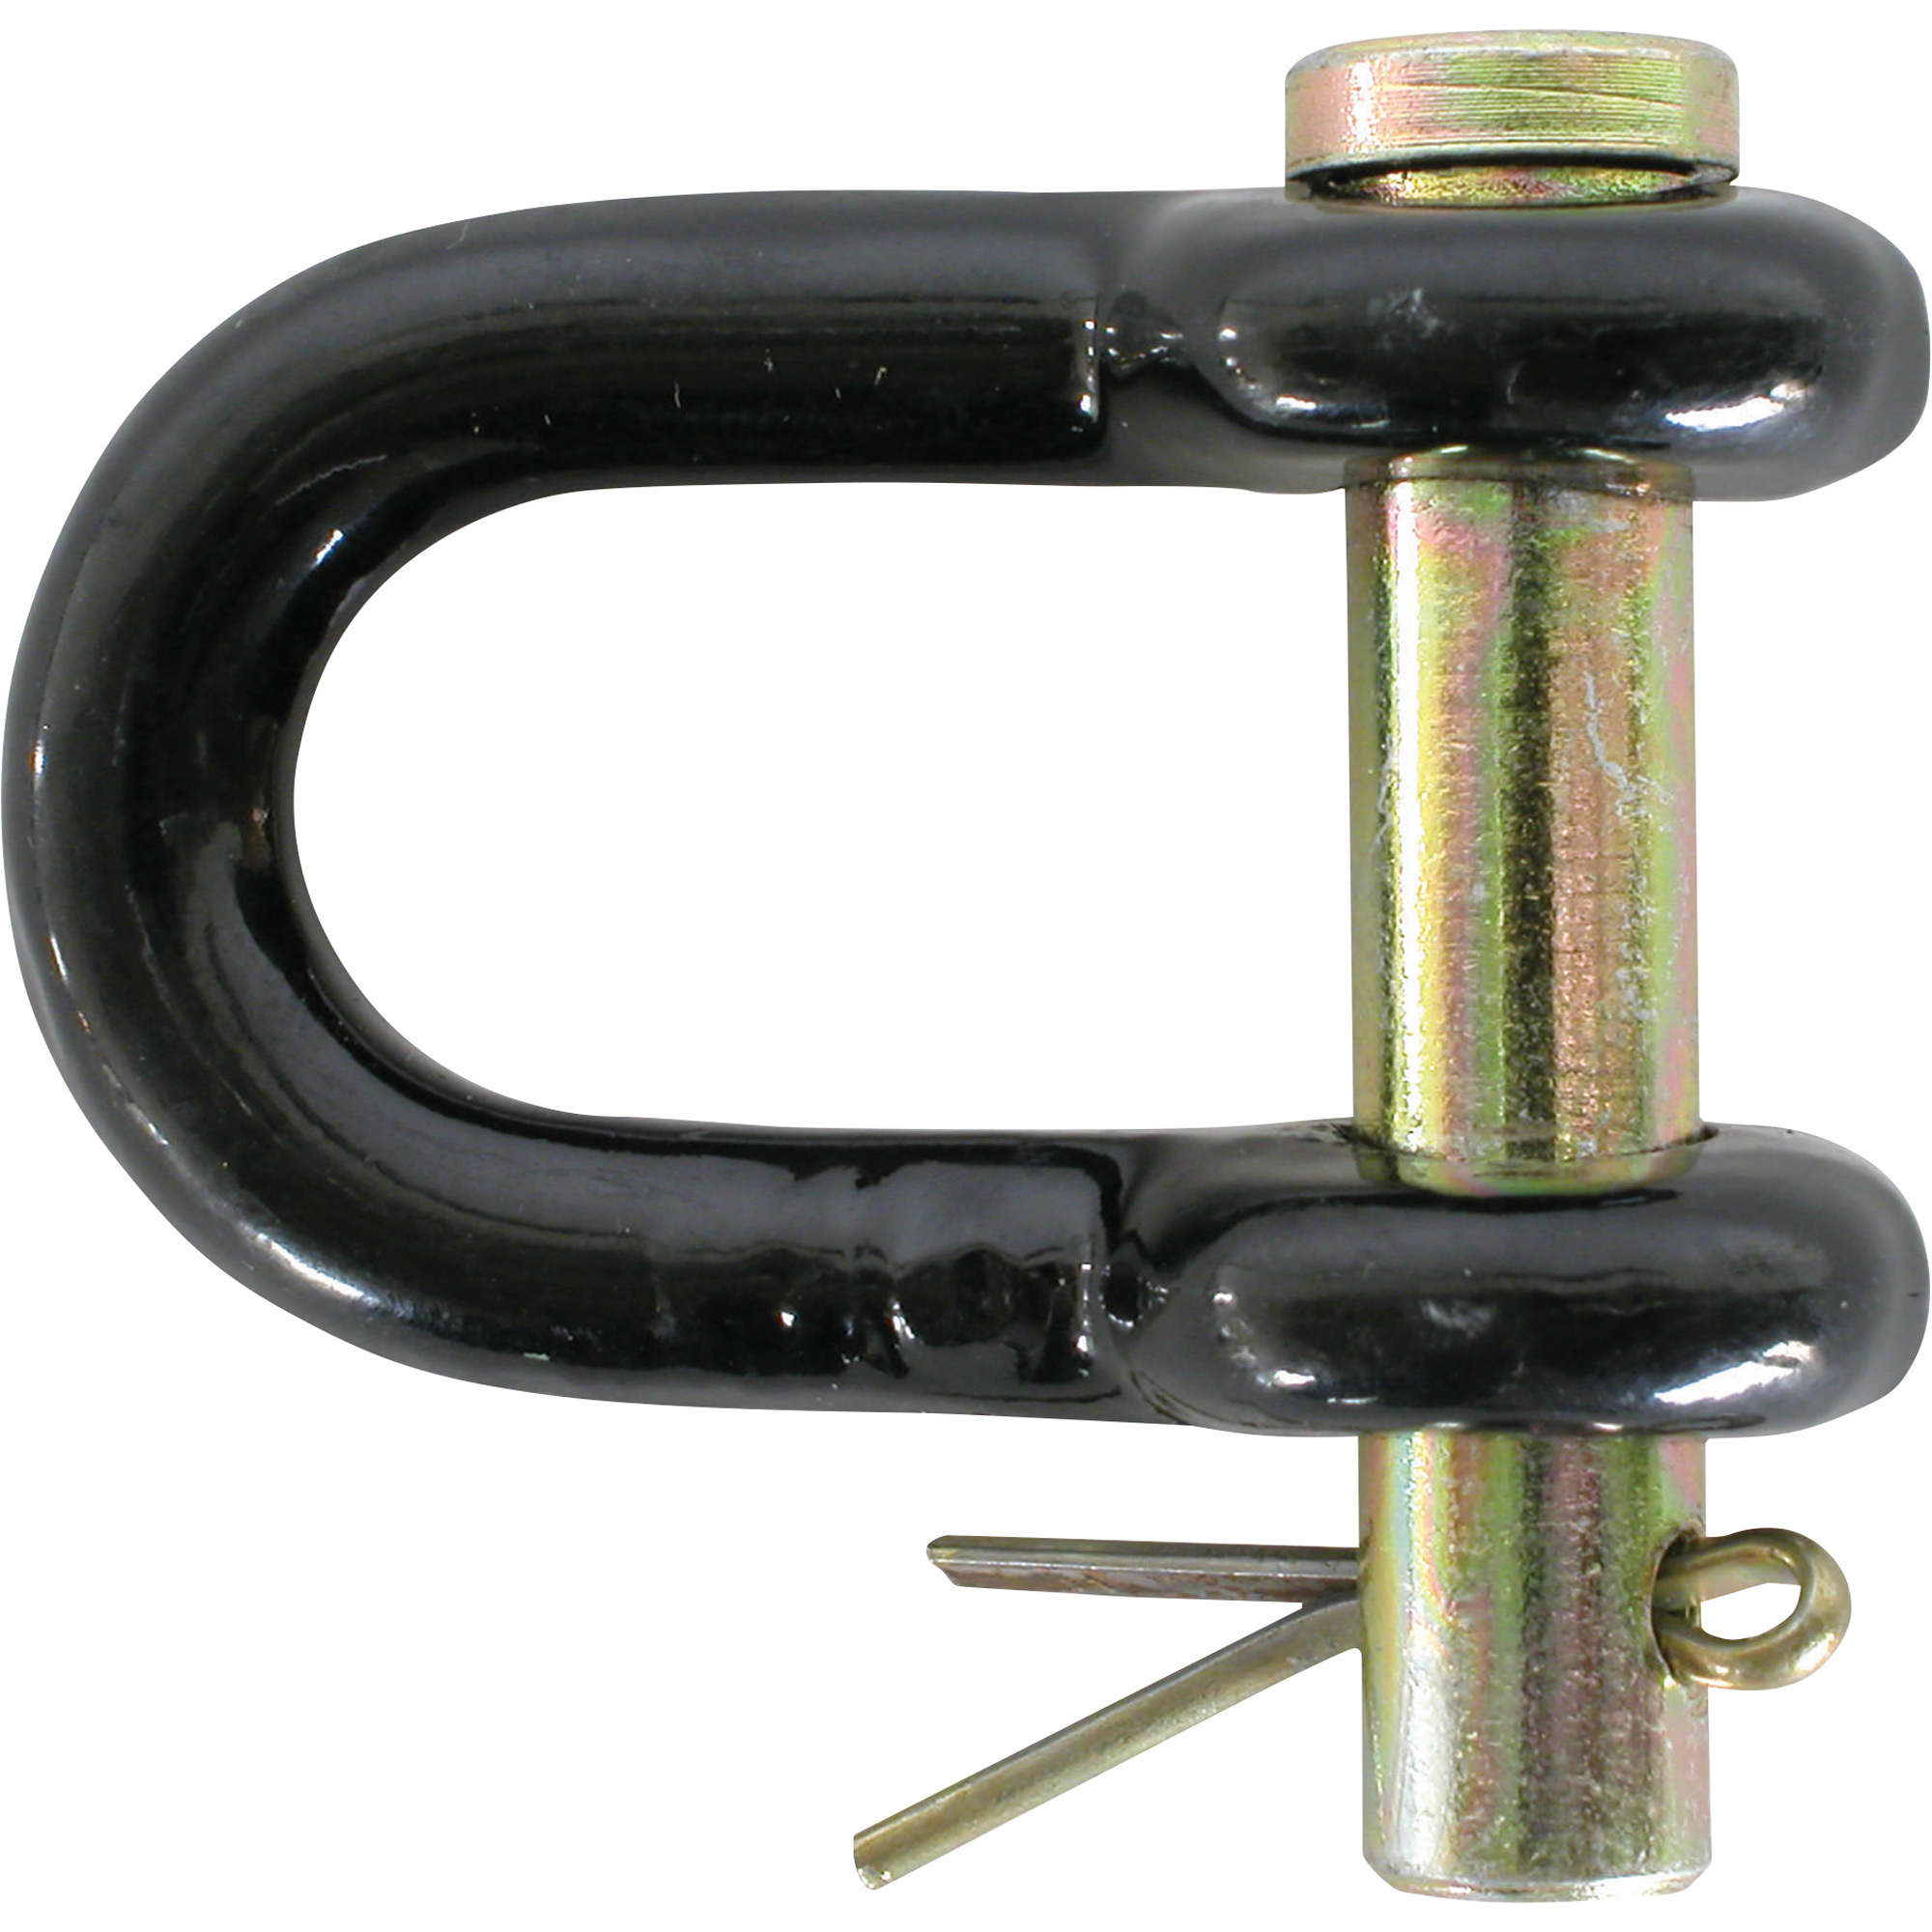 Braber Equipment Straight Clevis, 3/8Inch x 1 1/4Inch, Model 64.400.038